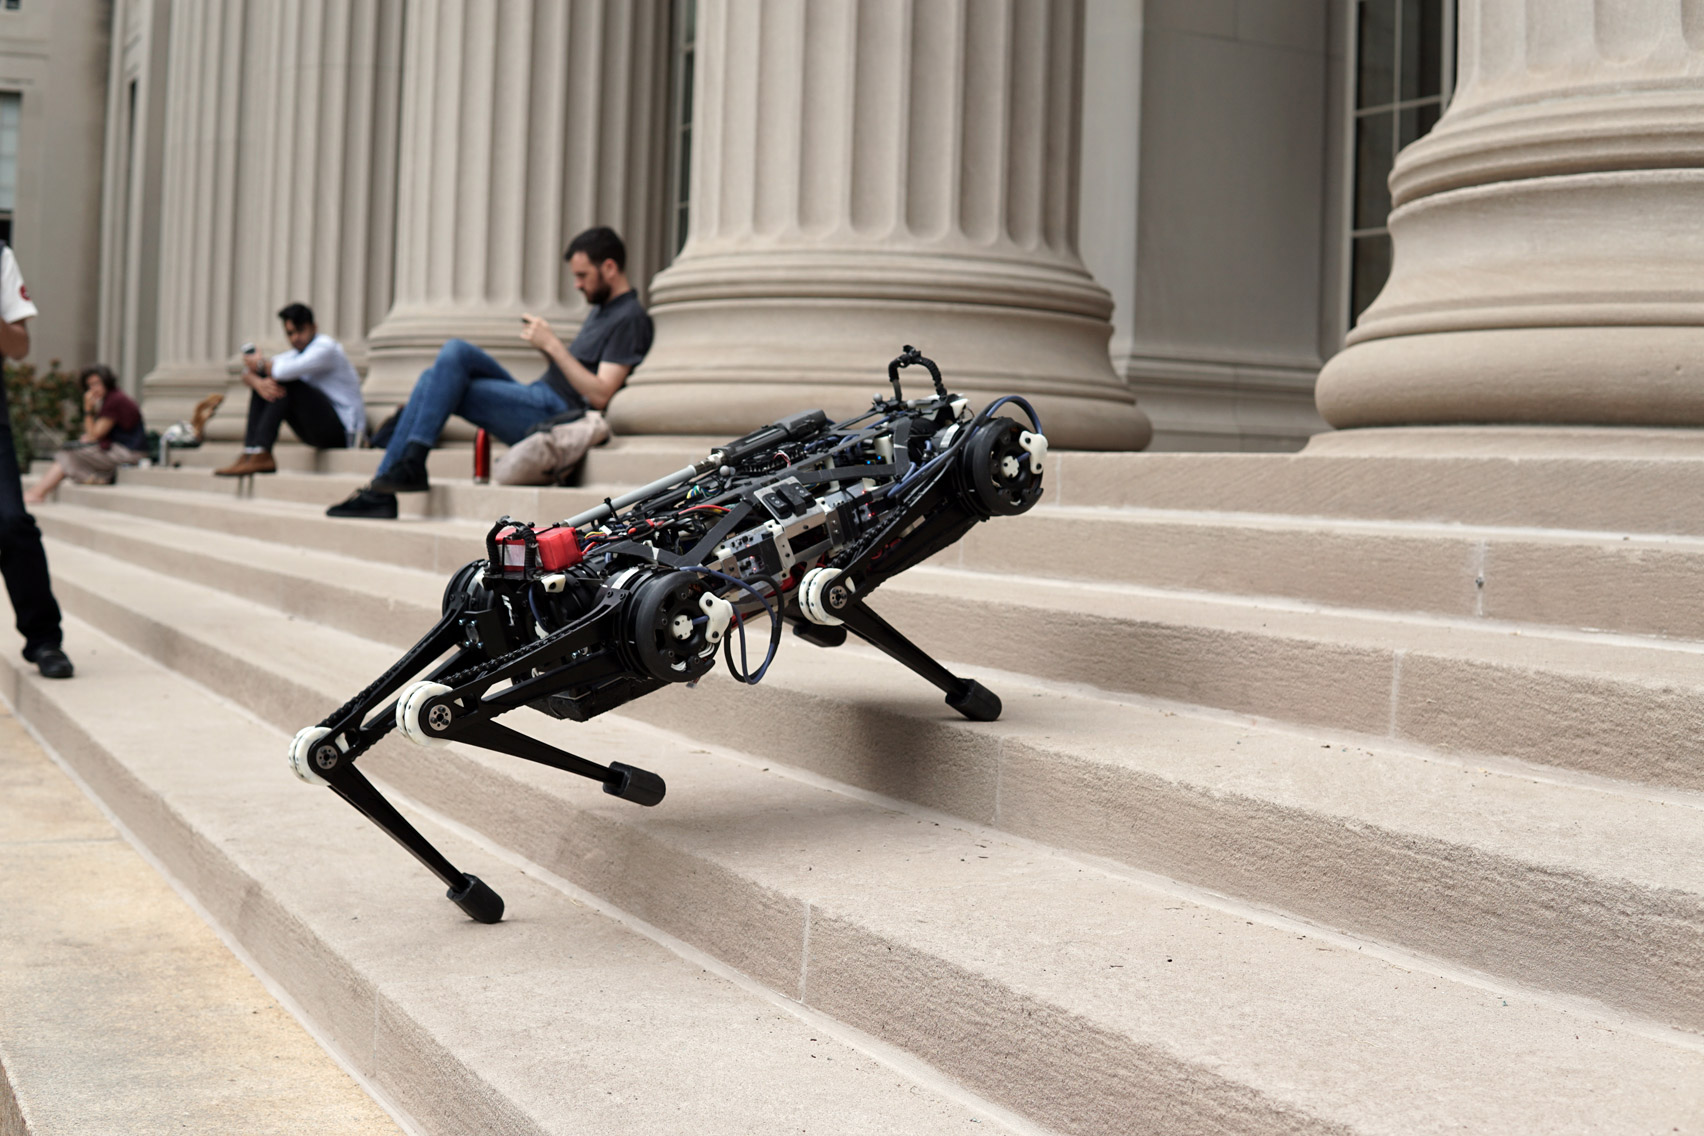 MIT's blind Cheetah 3 robot can navigate without sensors or cameras